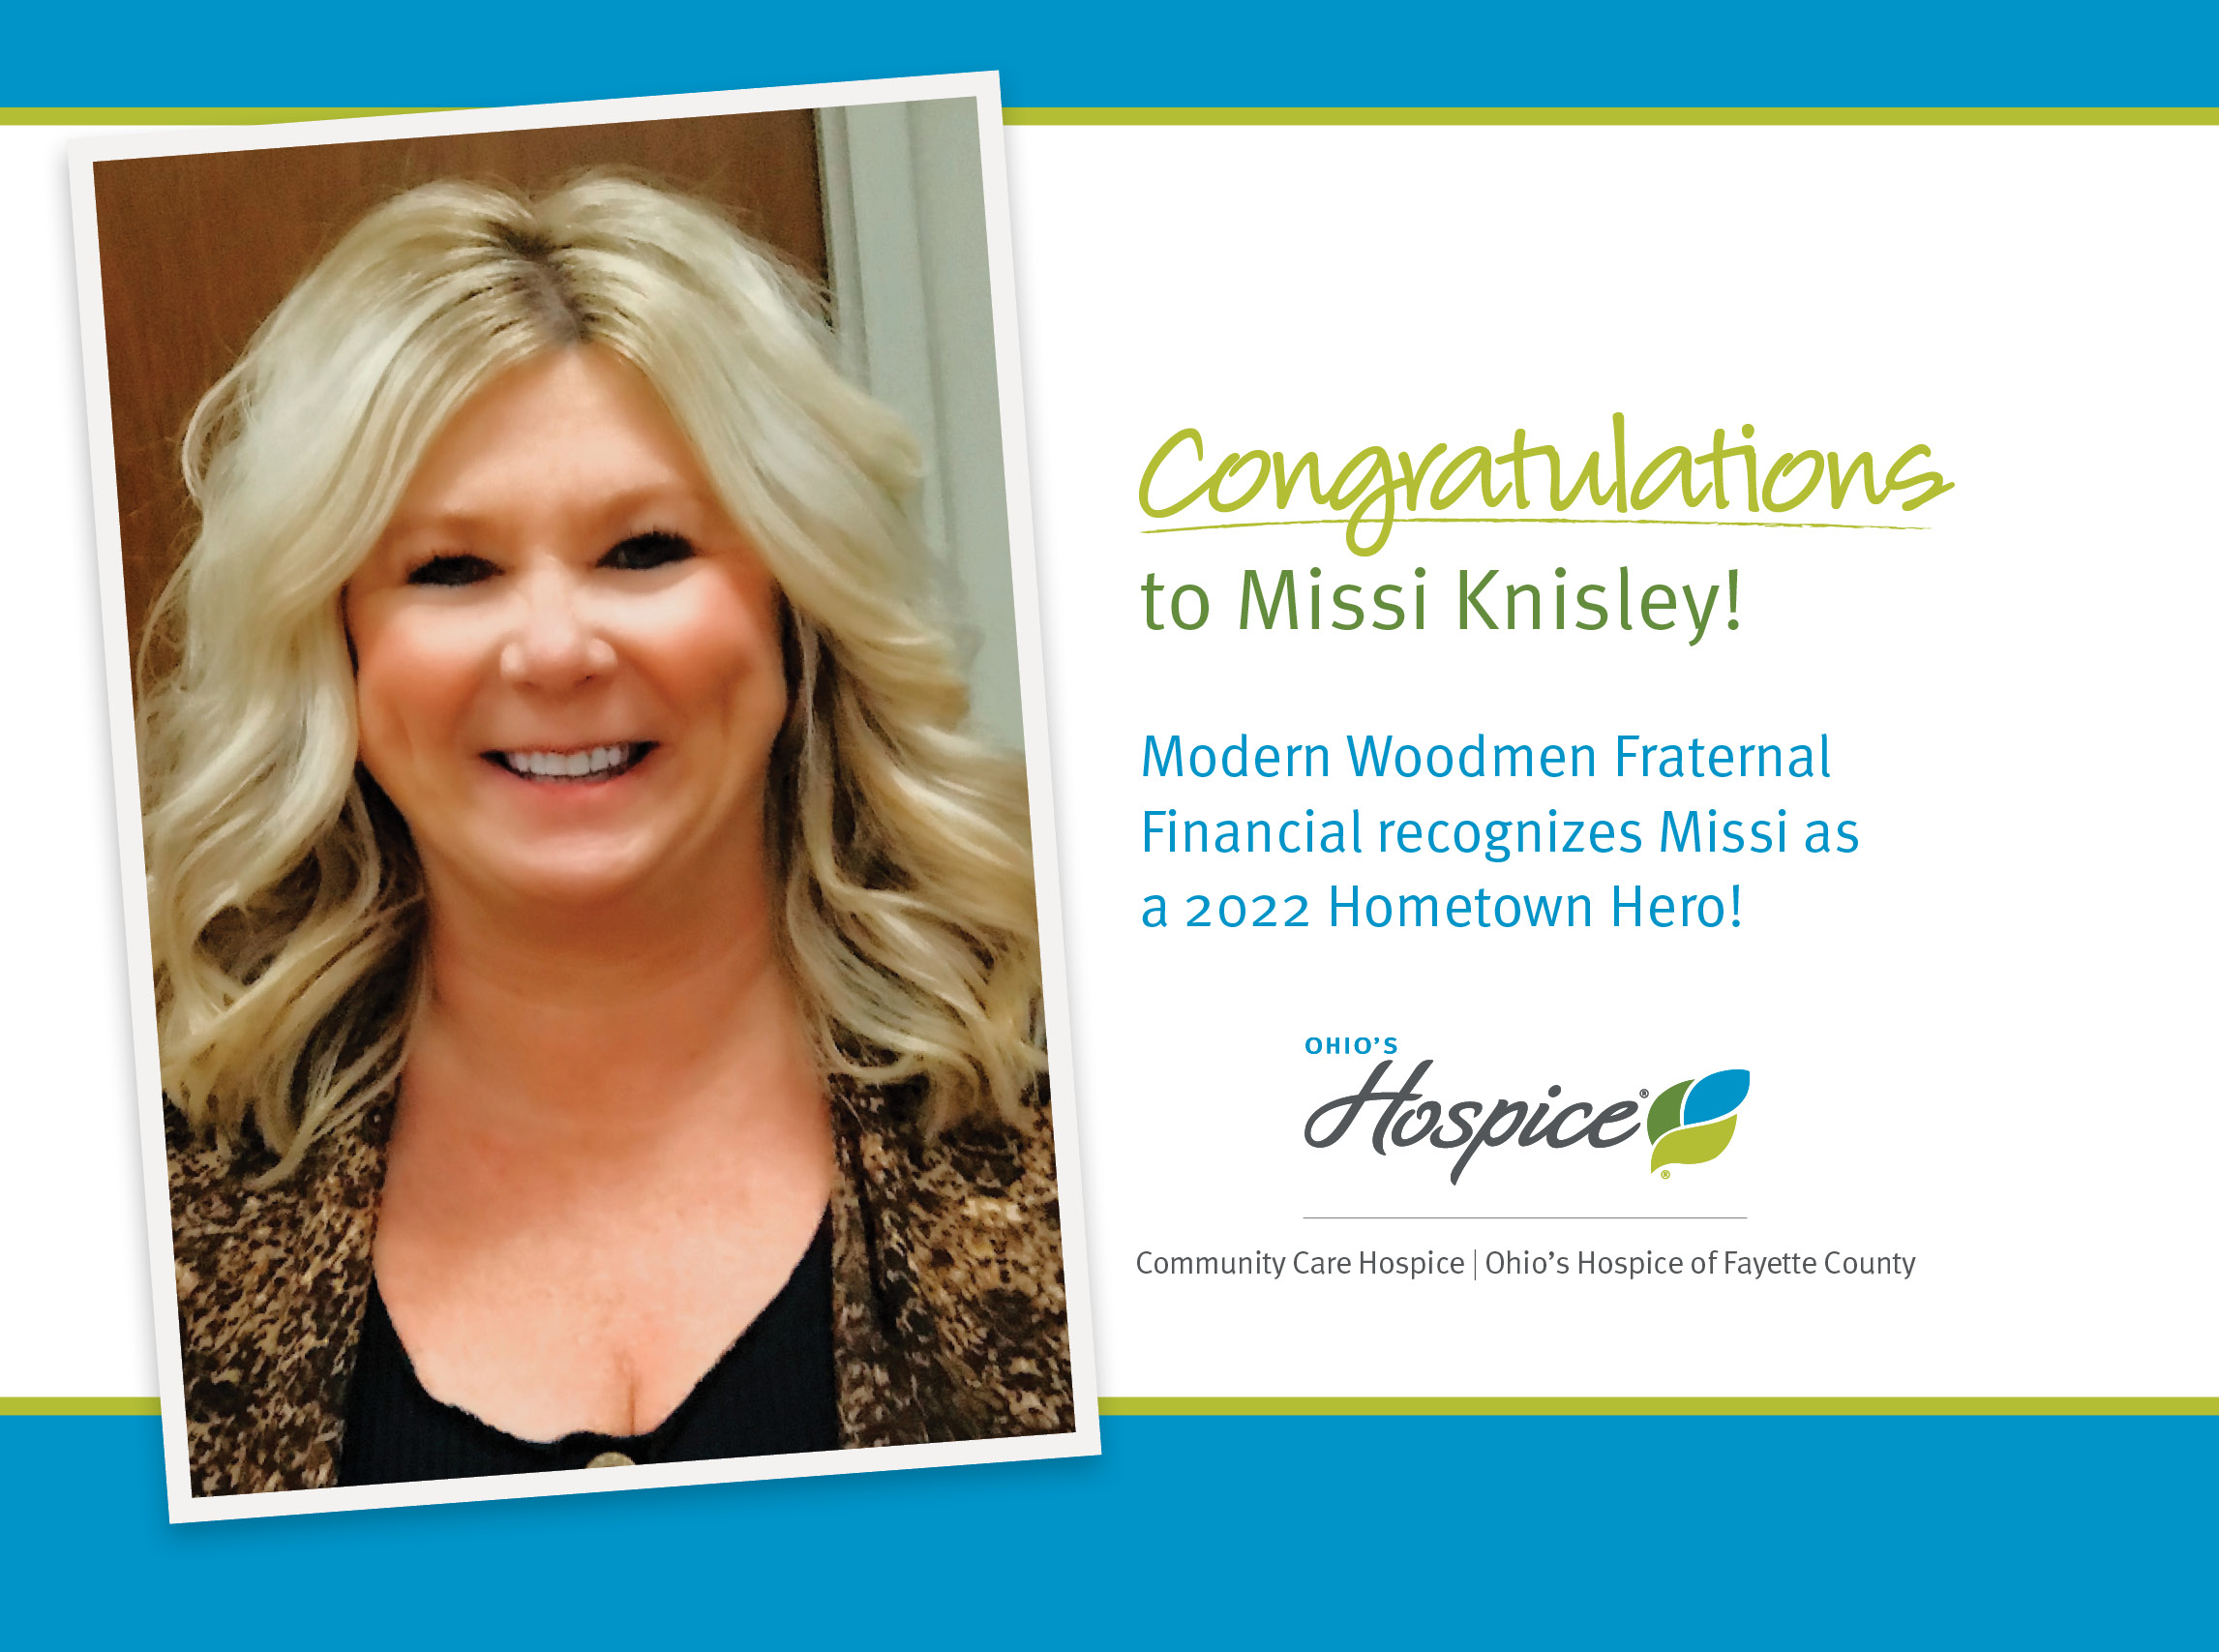 Congratulations to Missi Knisley! Modern Woodmen Fraternal Financial recognizes Missi as a 2022 Hometown Hero!